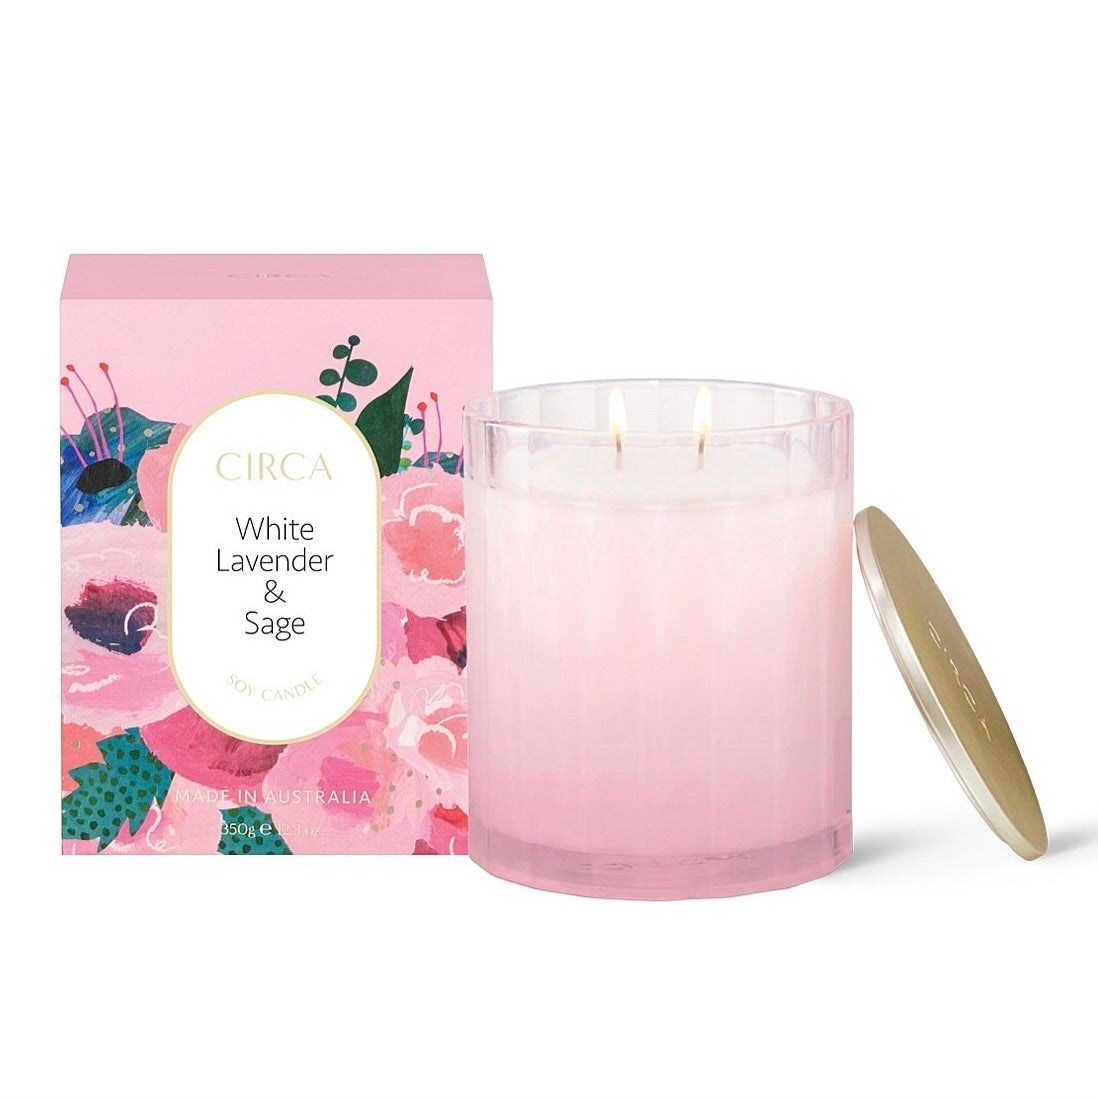 Circa White Lavender and Sage 350g Scented Soy Candle